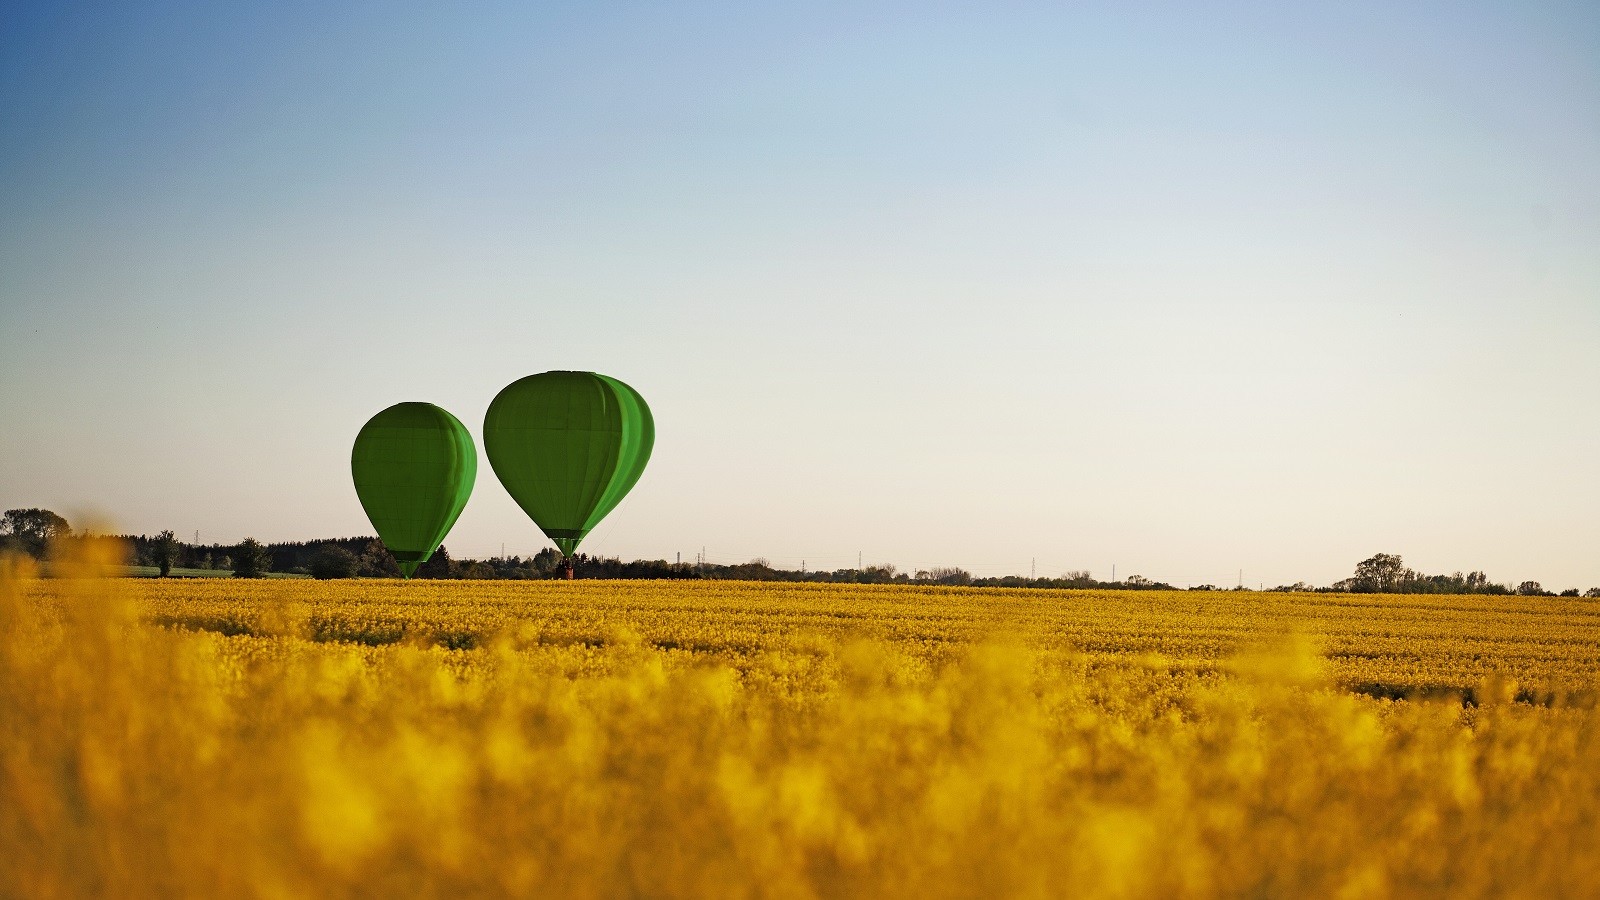 Two hot air balloons over a field